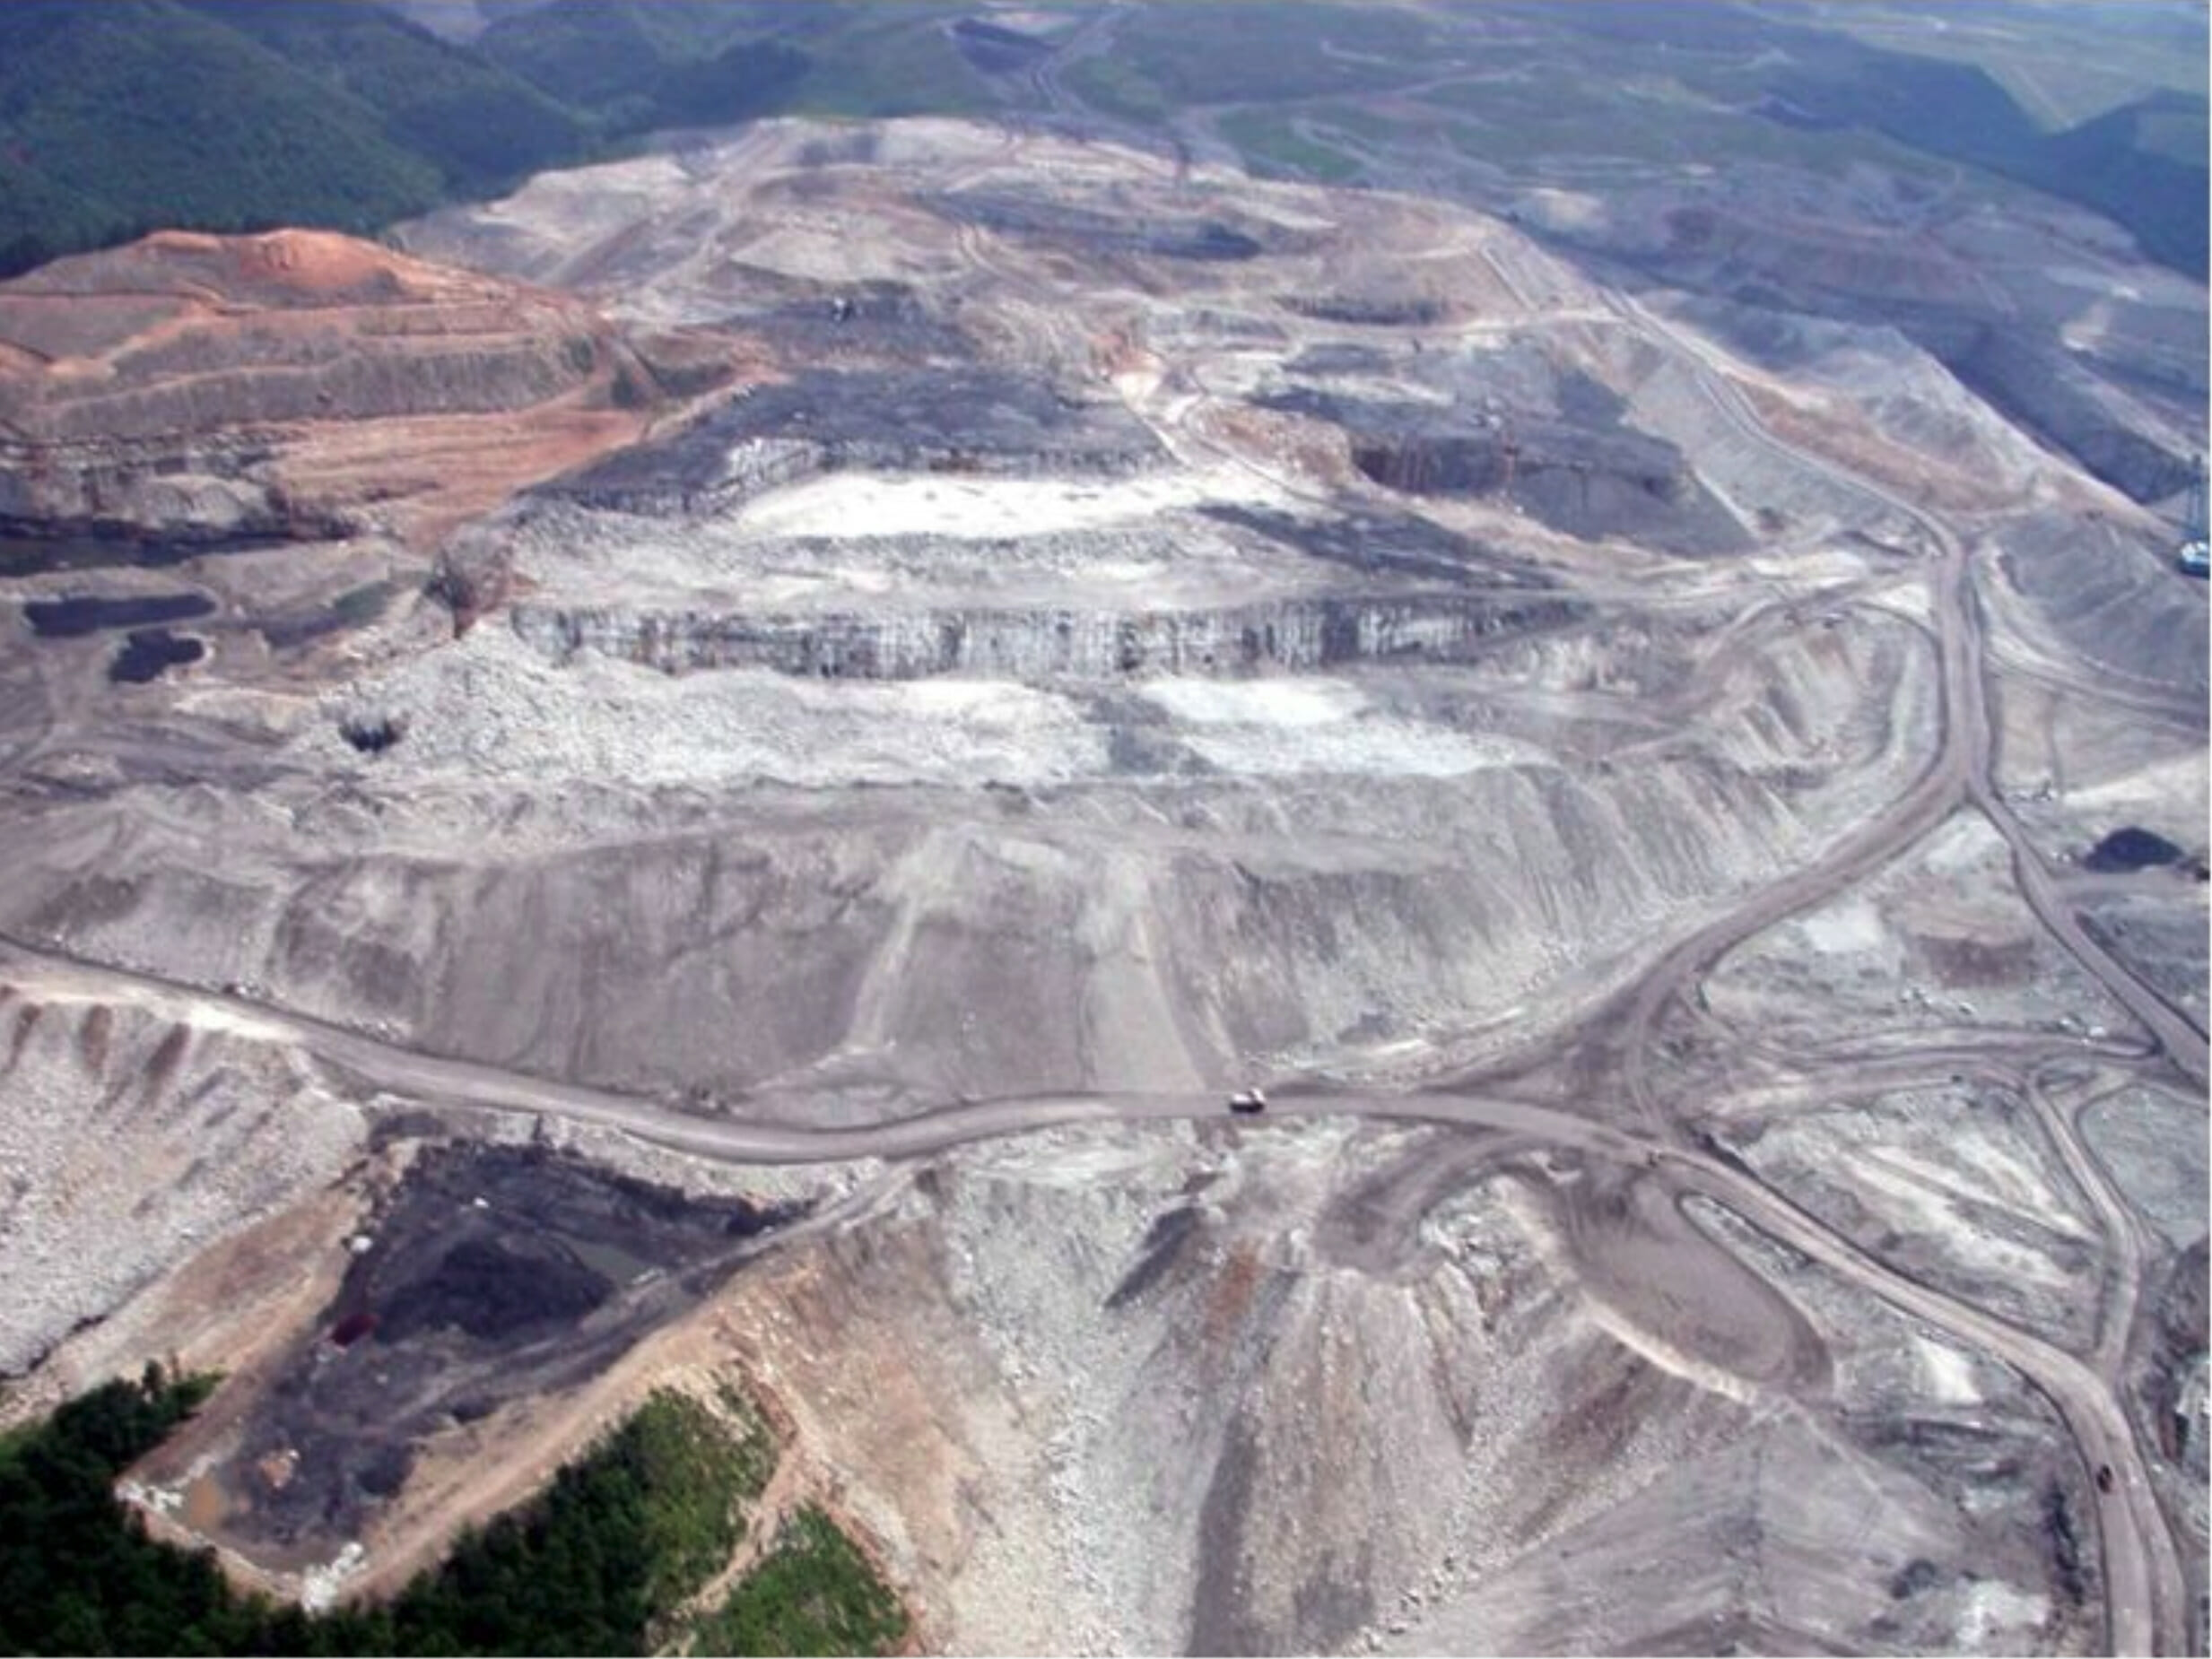 Mountaintop removal technique of coal mining – in West Virginia